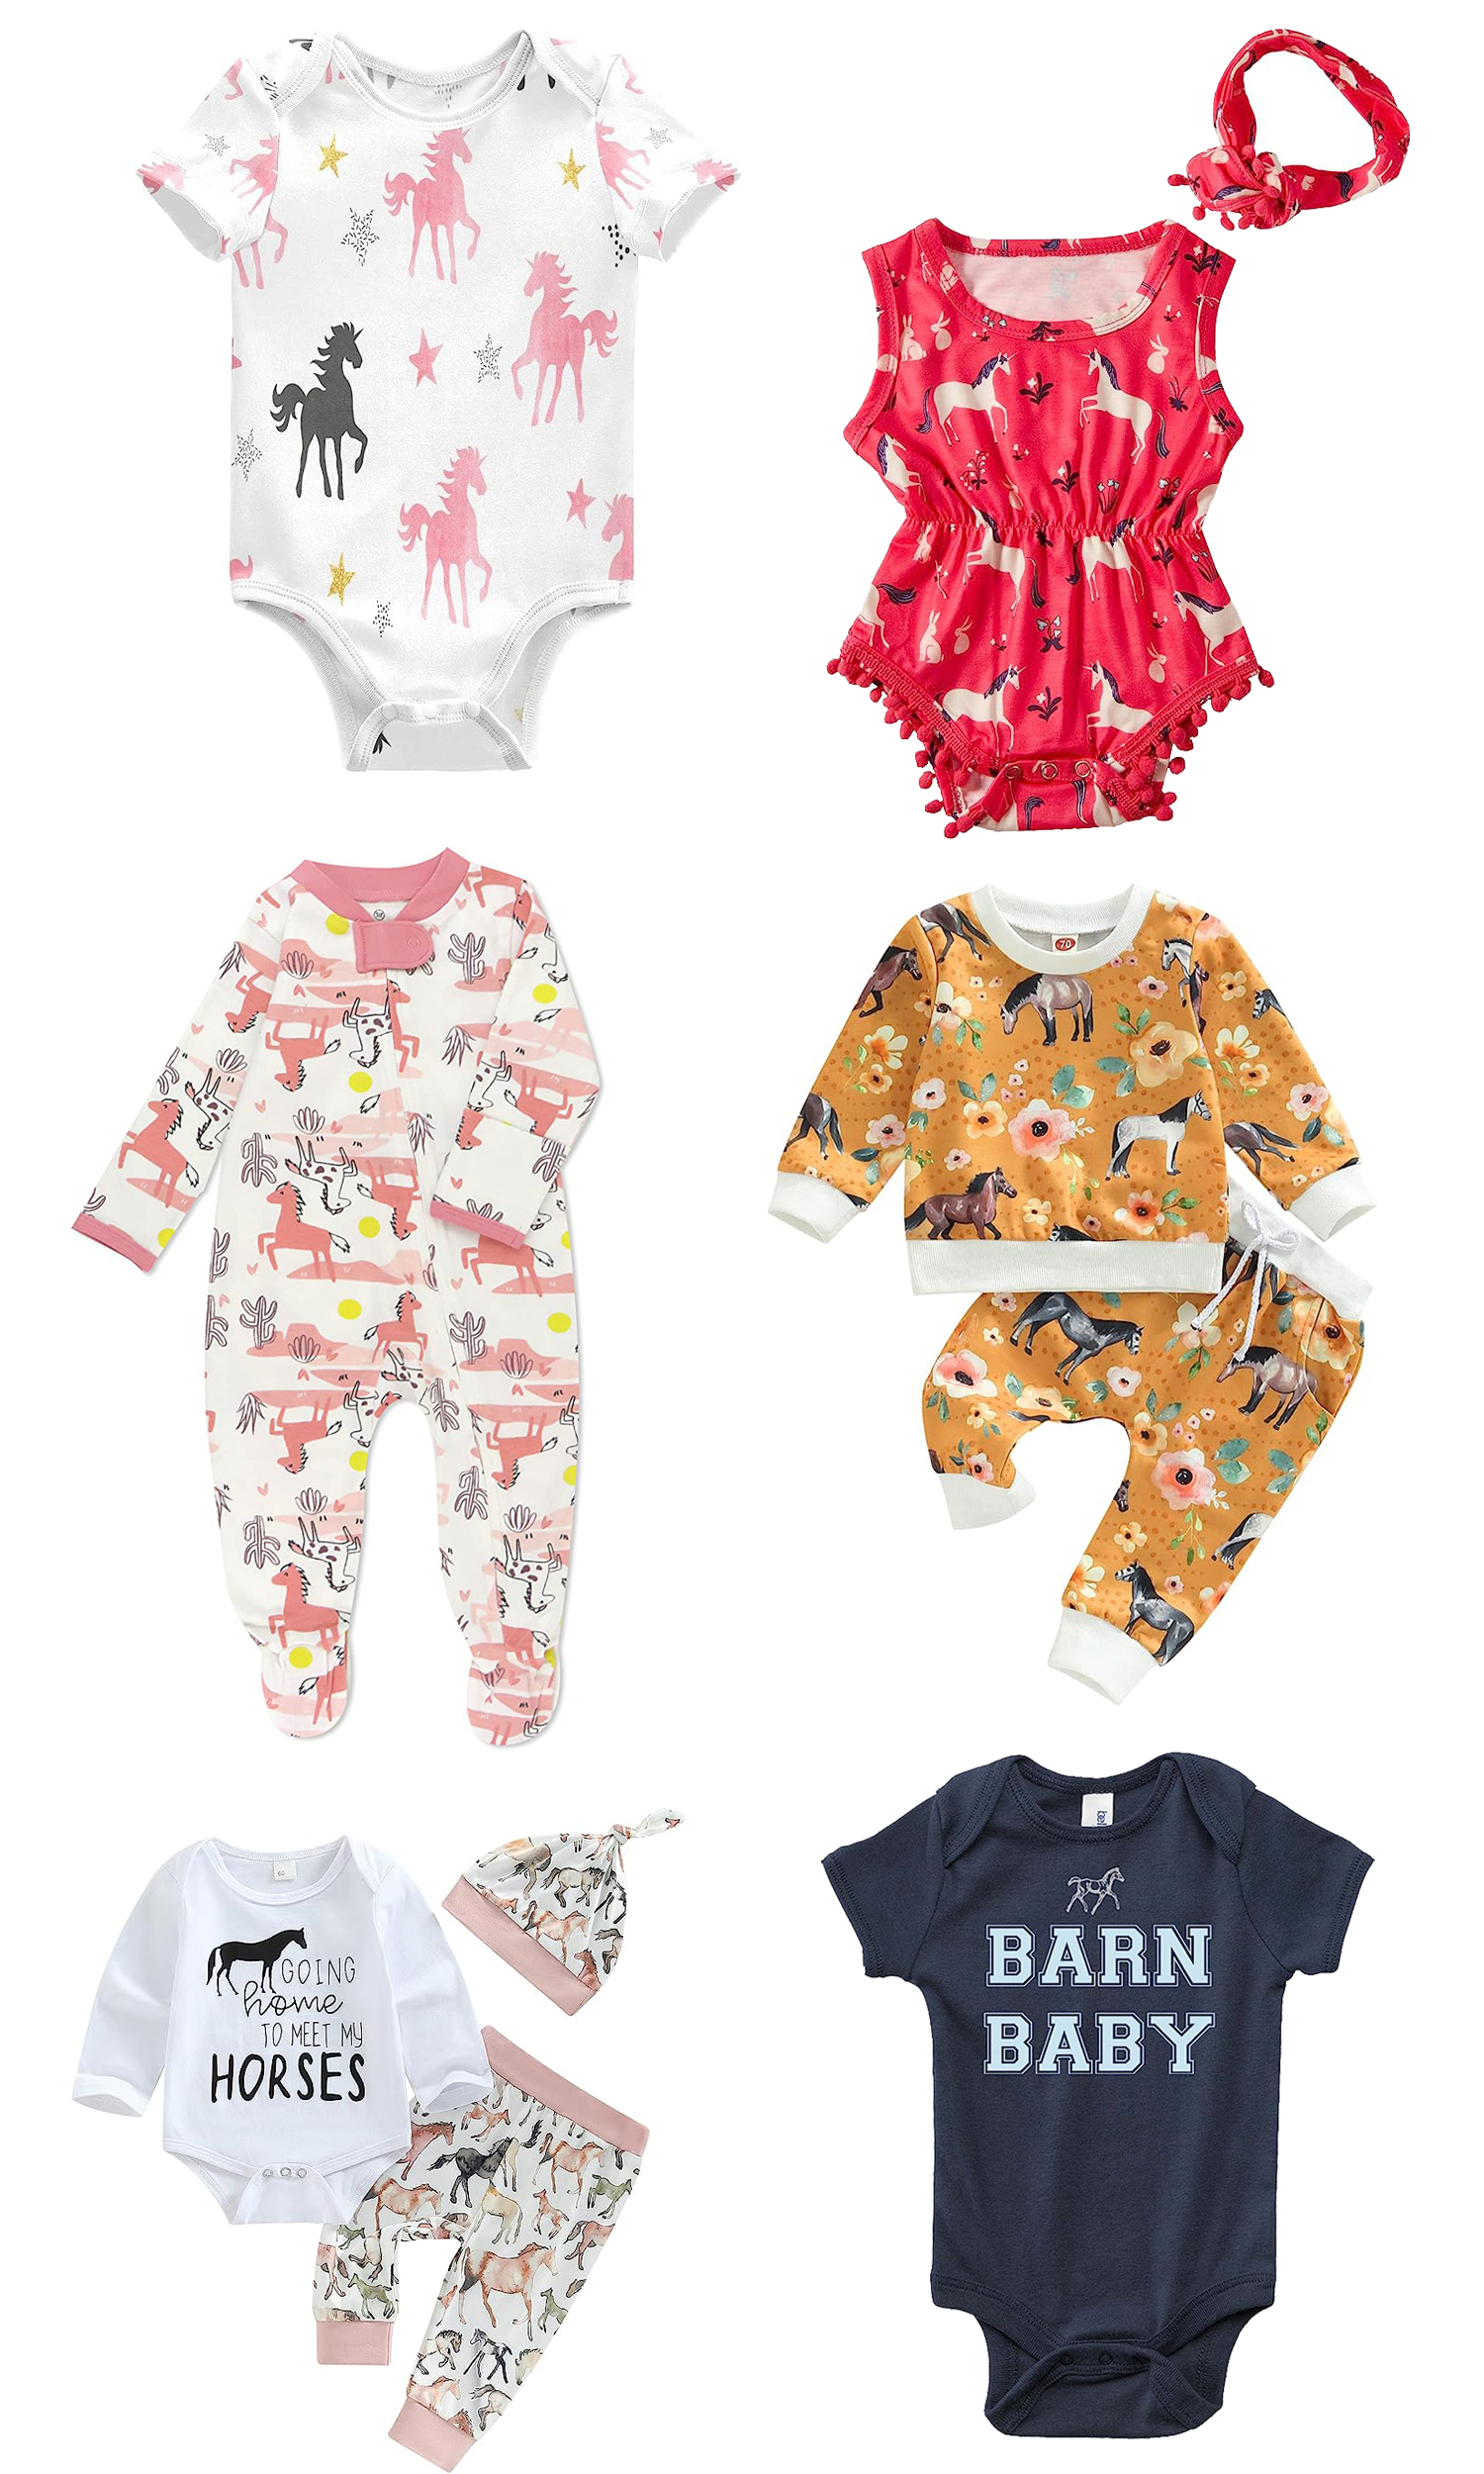 Adorable baby outfits for equestrians